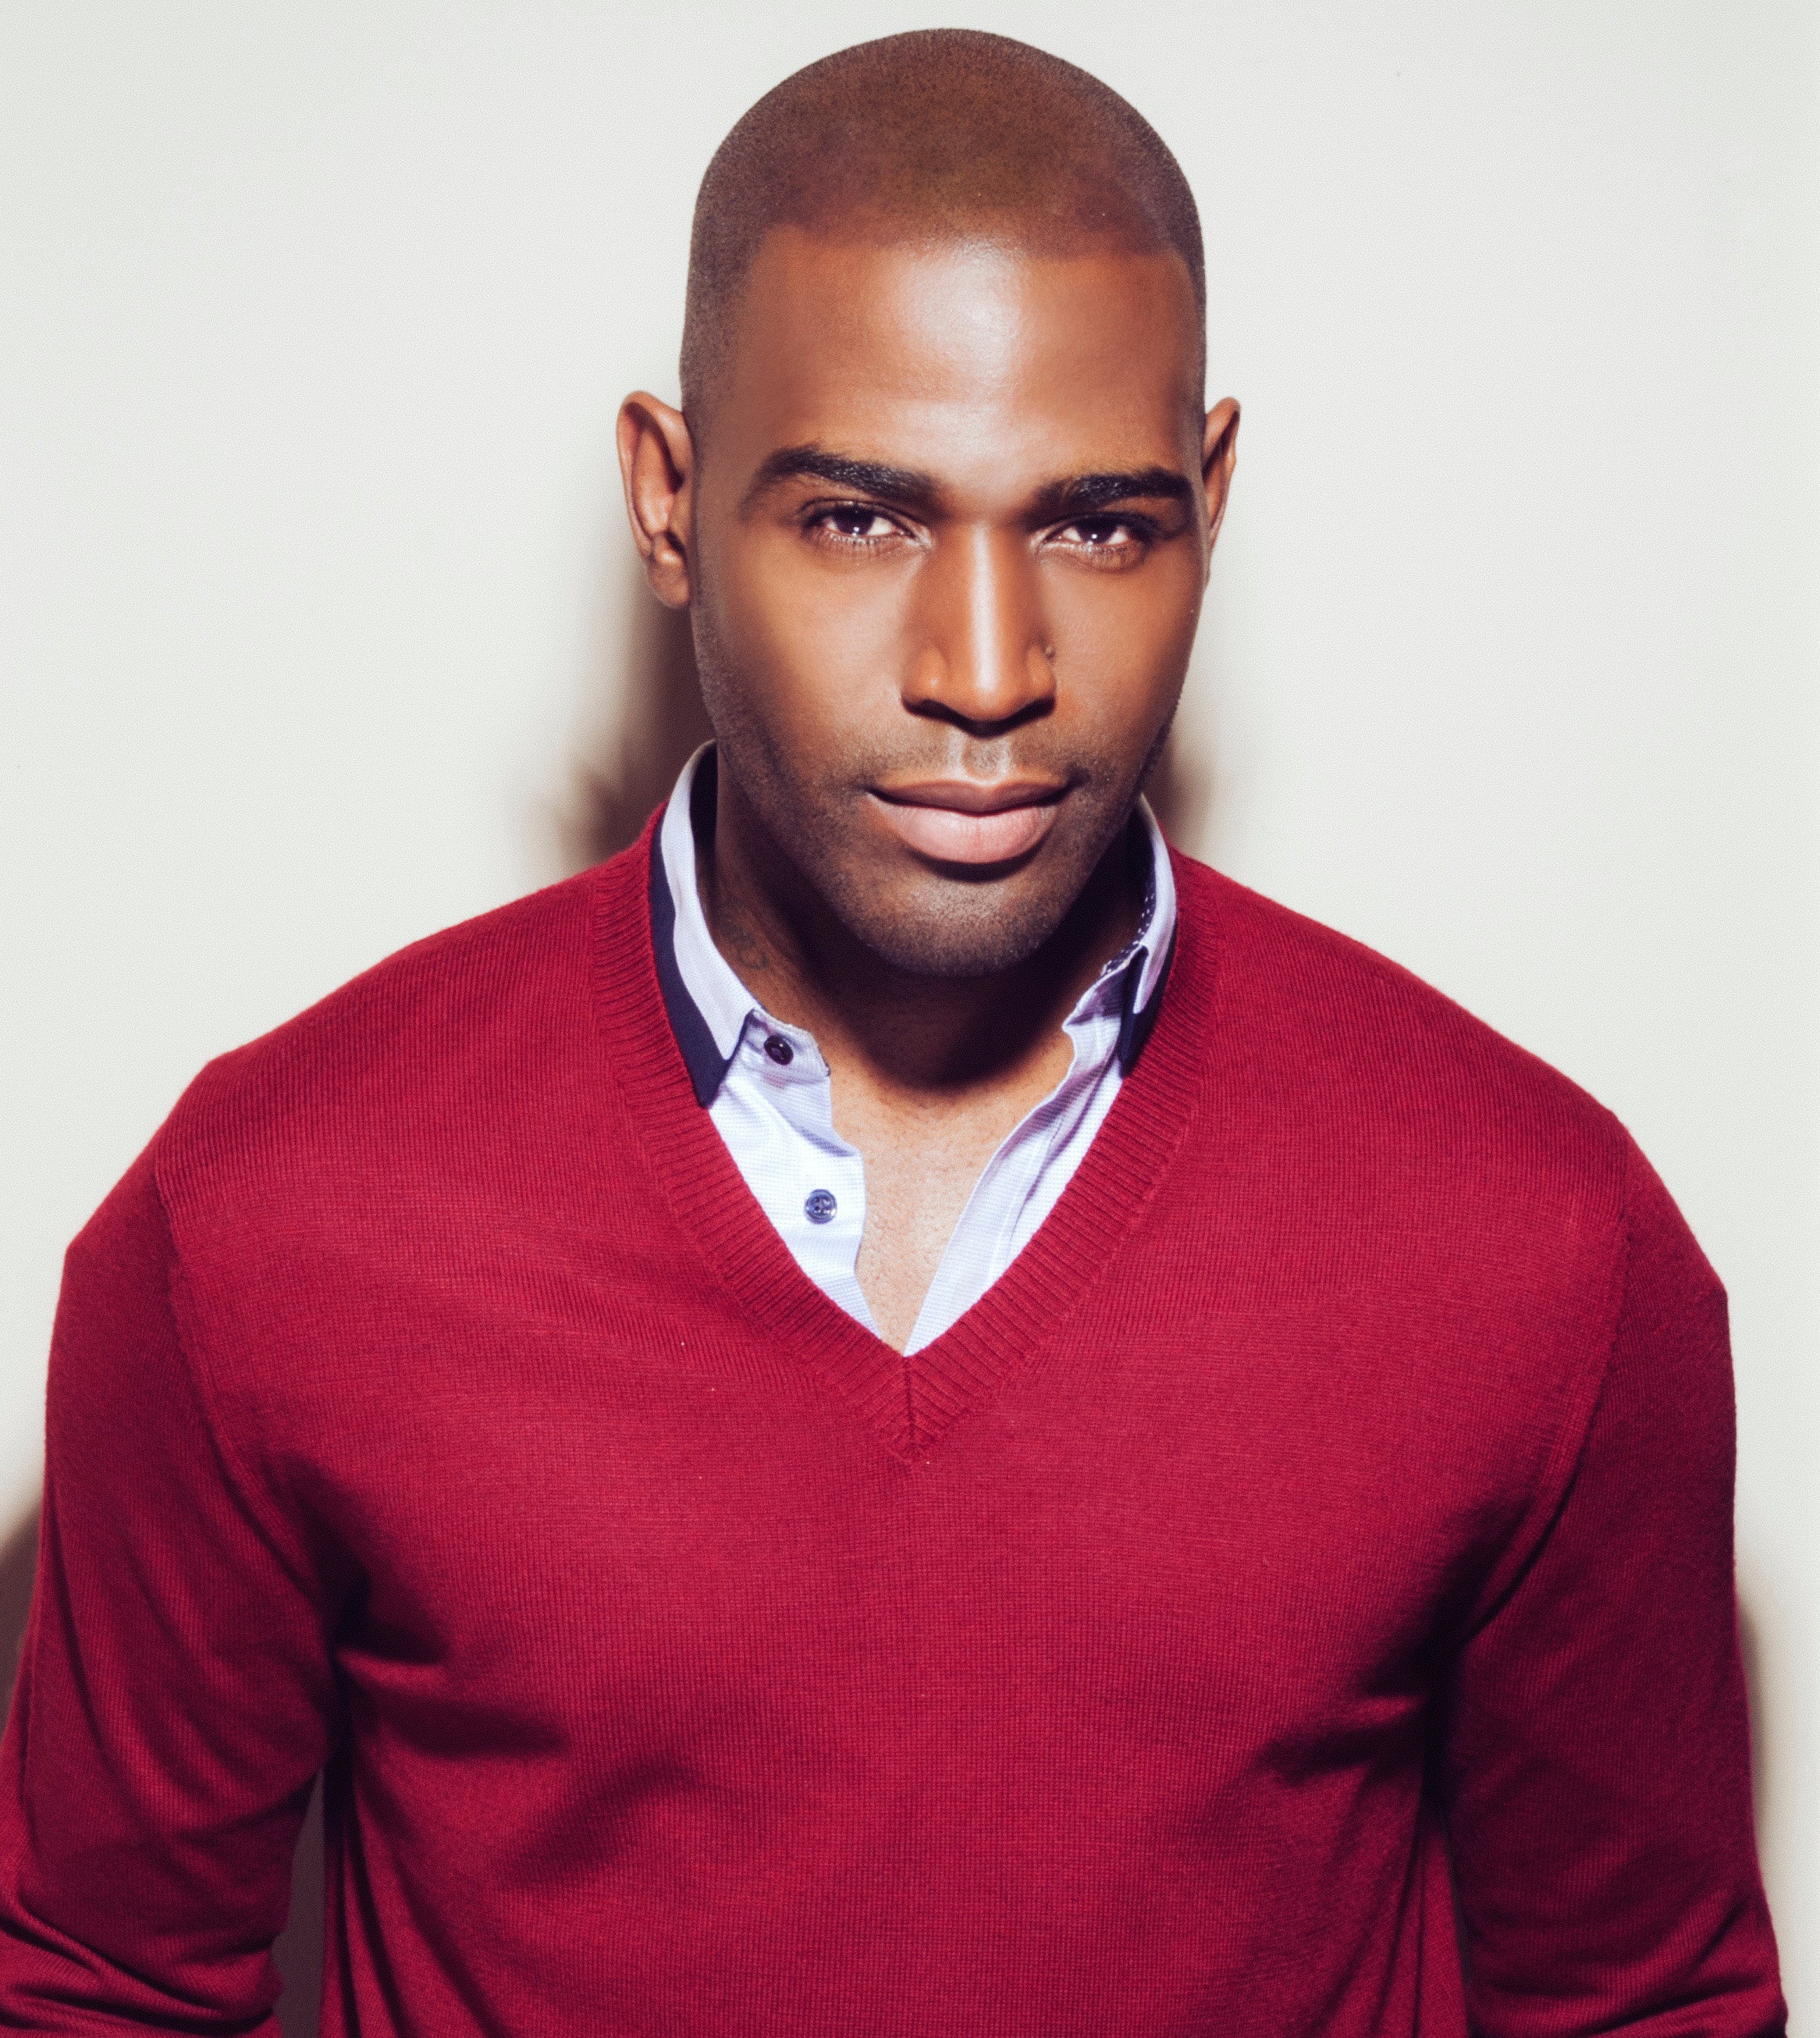 Karamo Brown Has Come A Long Way Since 'The Real World' And There's More Up His Sleeve
